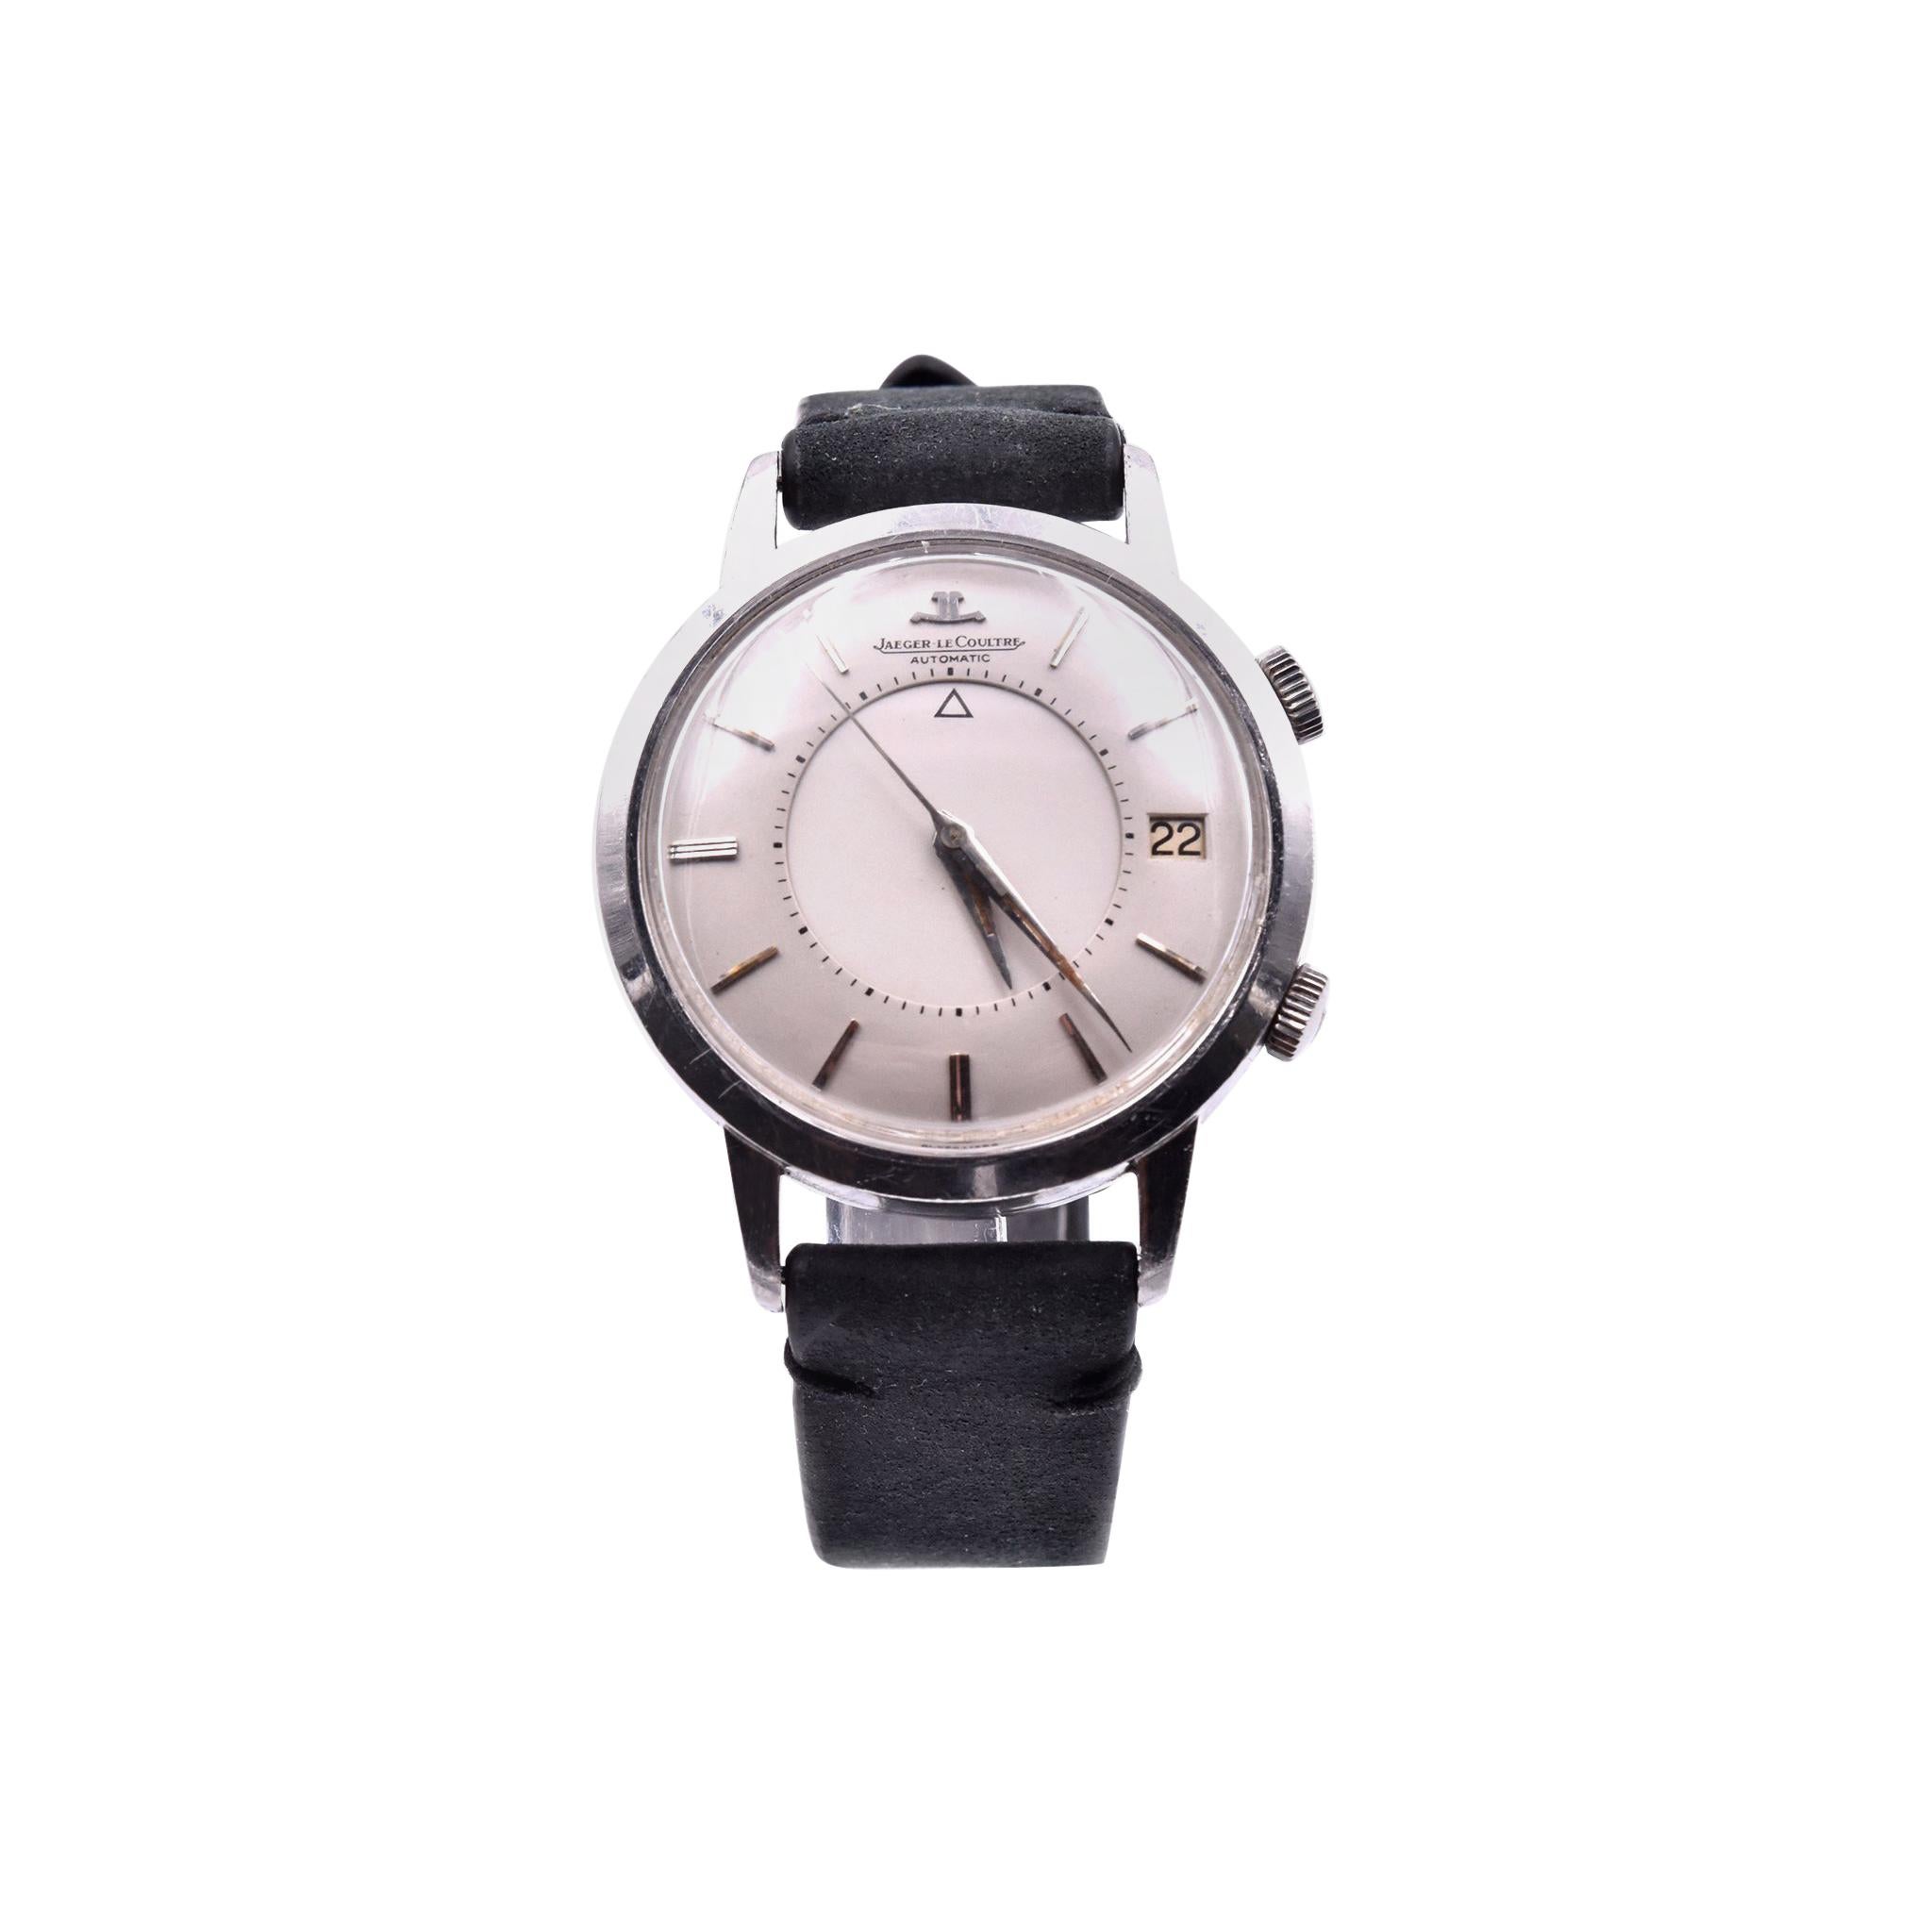 Jaeger-LeCoultre Stainless Steel Vintage Date Memovox